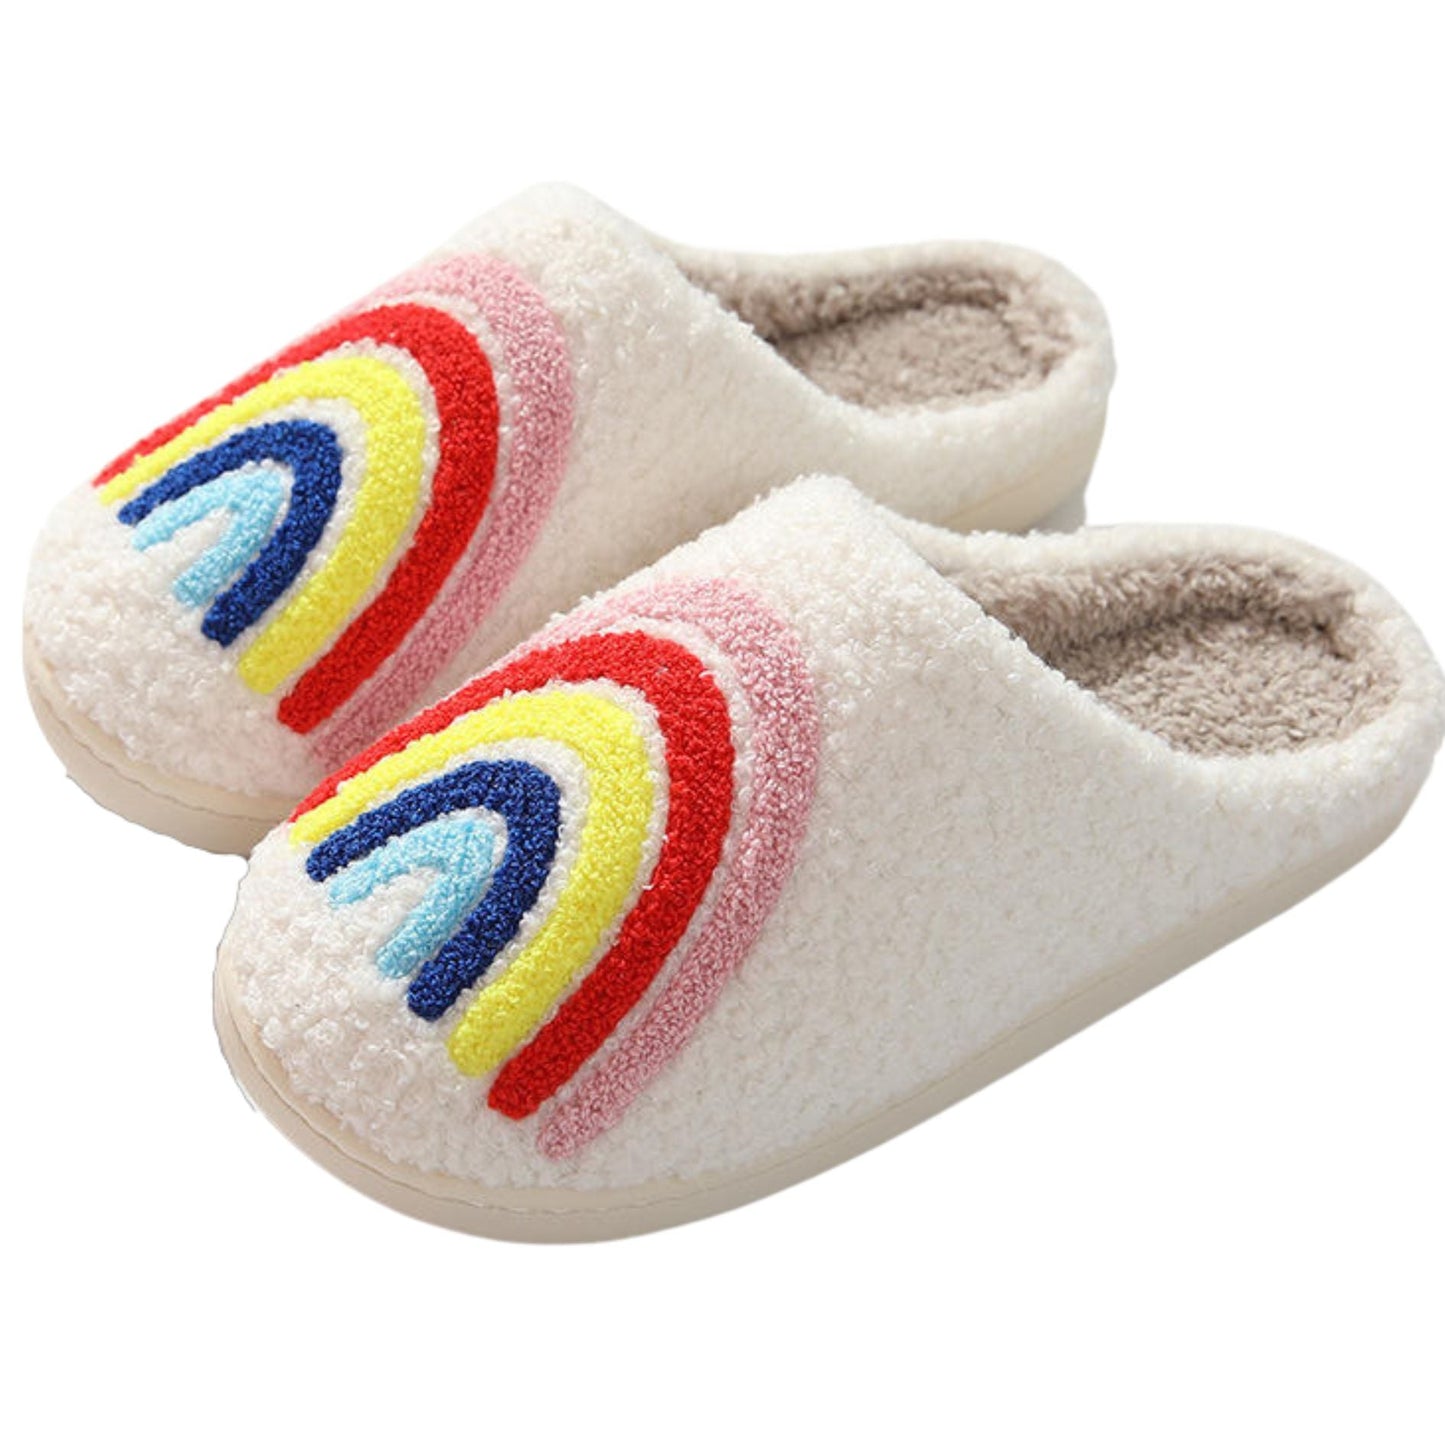 Rainbow Plush Cozy Women's Slippers | Giftable Slip-On Mules House Shoes